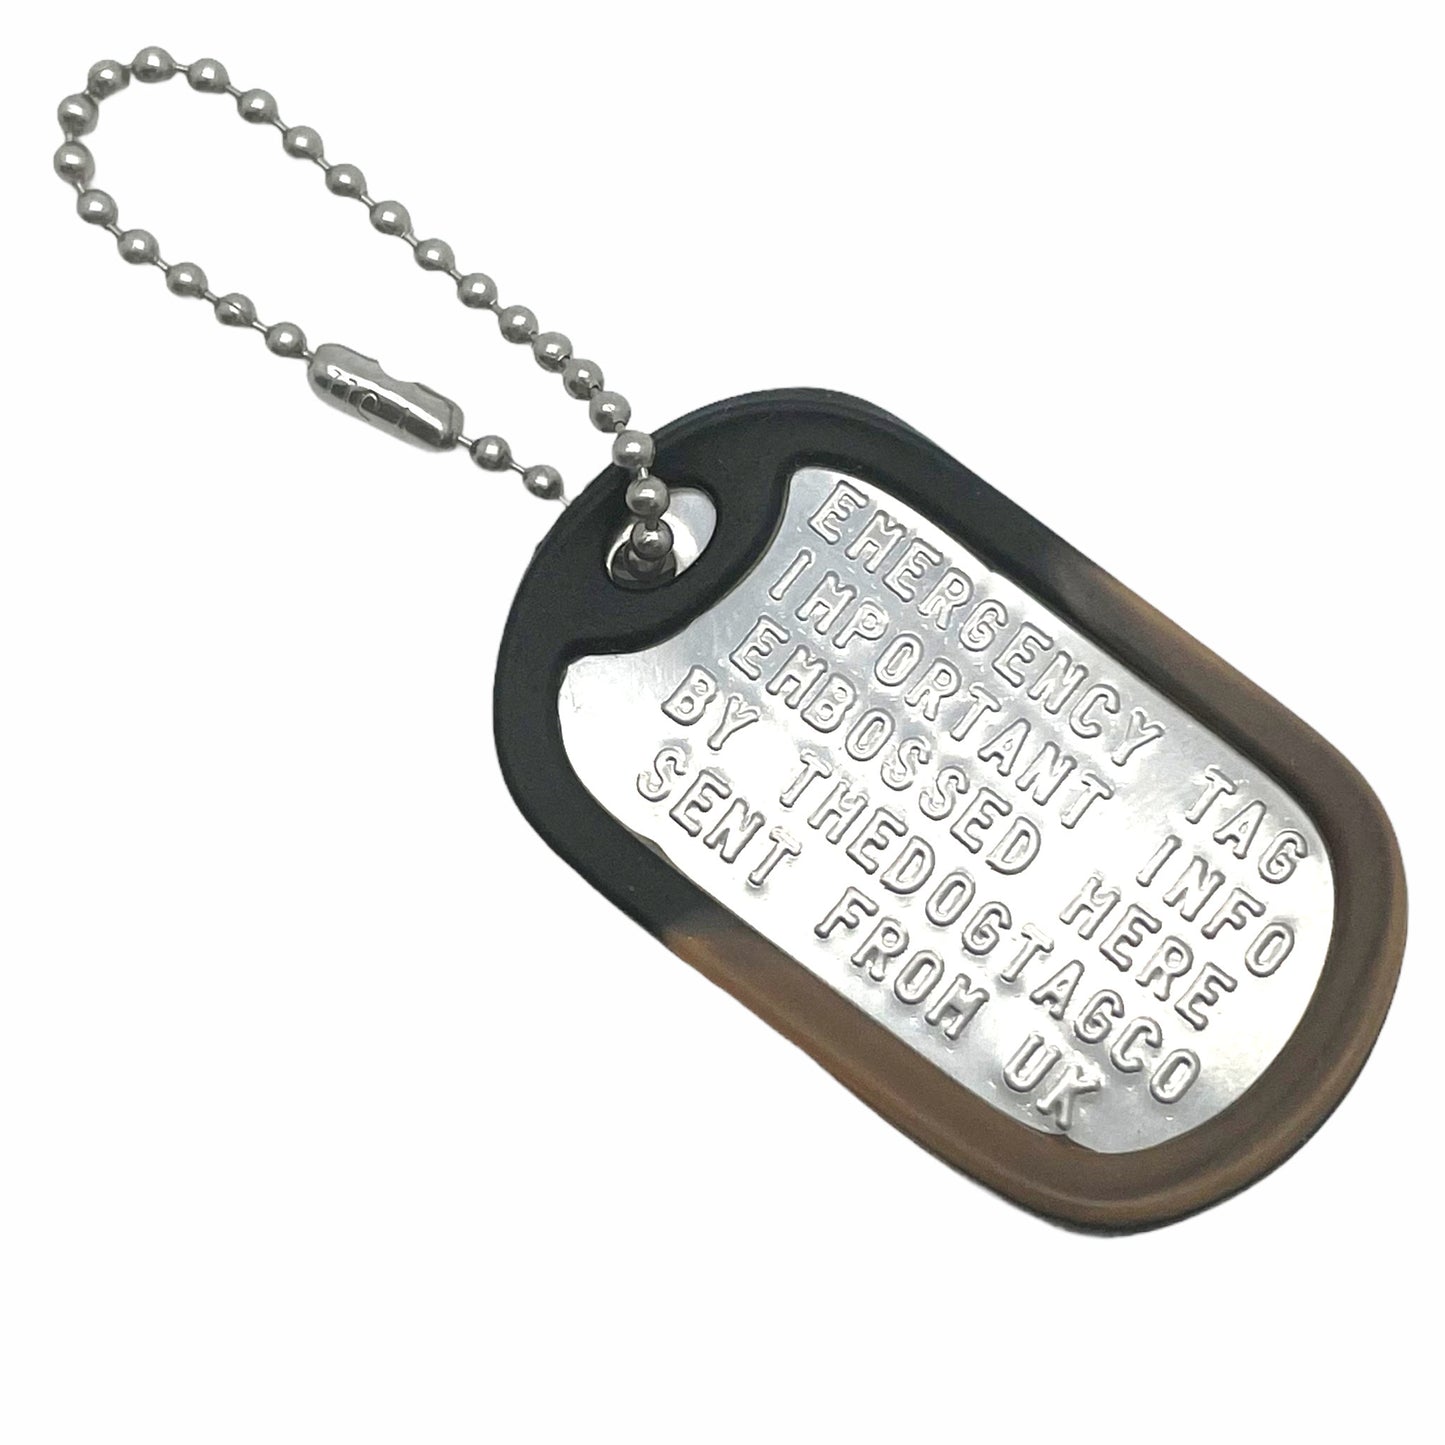 Military Dog Tag Stainless Steel Single Keychain, Emergency, Luggage Tag, Supplied supplied with 4" chain - TheDogTagCo